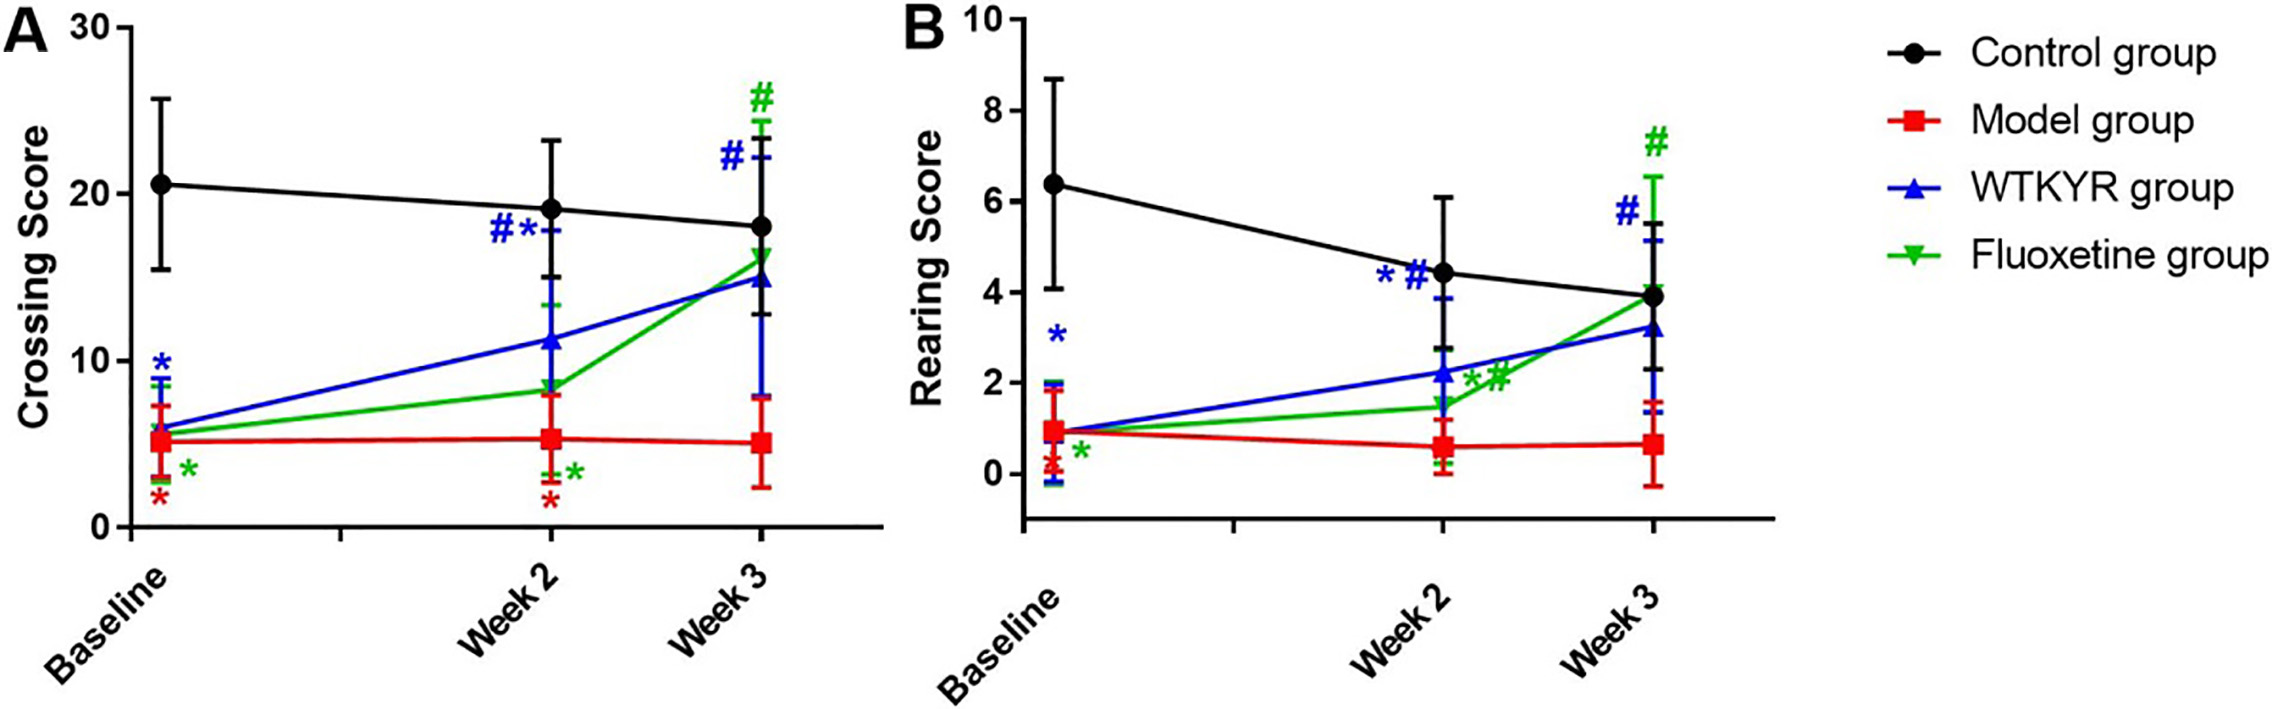 Crossing scores (A) and rearing scores (B) in open field tests of the four groups. The results displayed that the crossing scores of rats in the model, WTKYR, and fluoxetine groups were lower than the control group at baseline. A significant increase was displayed in the WTKYR group when compared with the model and fluoxetine groups at the second week of treatment. It was noted that both the WTKYR and fluoxetine group rats recorded higher crossing scores in the last week, and then no significant difference was observed among the WTKYR, fluoxetine group and the control group. Figure 2B displayed the rearing scores of the model, WTKYR, and fluoxetine groups decreased after modeling. After two weeks of treatment, the rearing scores of the fluoxetine group and WTKYR group were increased compared with the model group, but still lower than the control group. And no significant difference among the WTKYR, fluoxetine, and control groups were found until the last week of treatment.